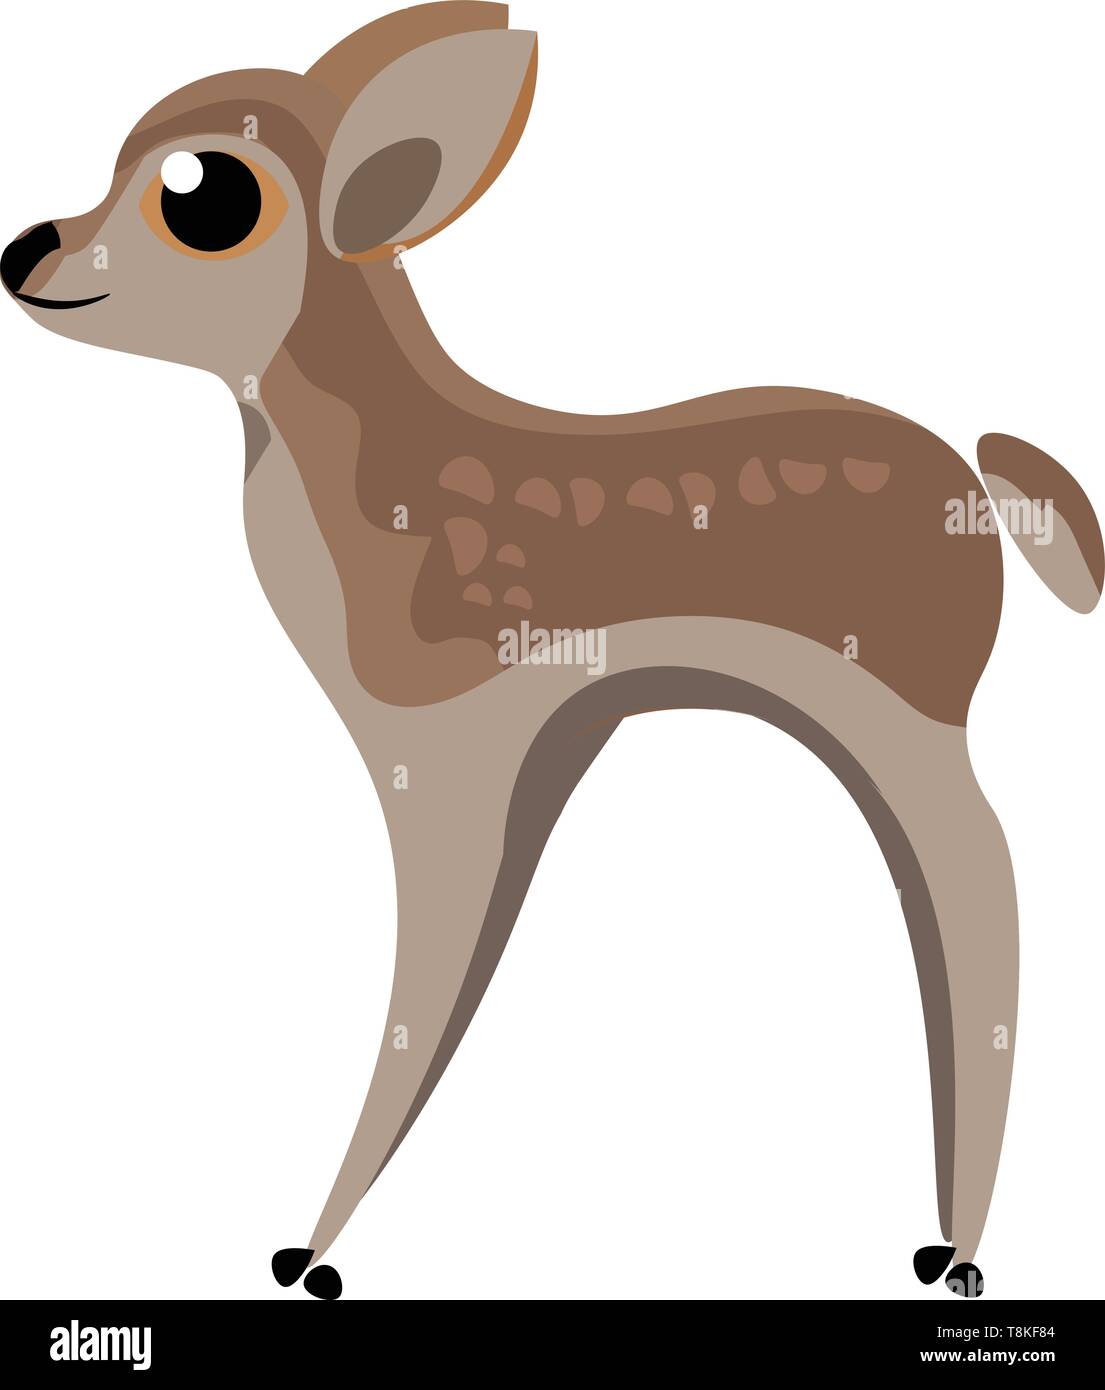 Deer is a large wild animal that lives on grass and leaves, typically male deer has antlers., vector, color drawing or illustration. Stock Vector